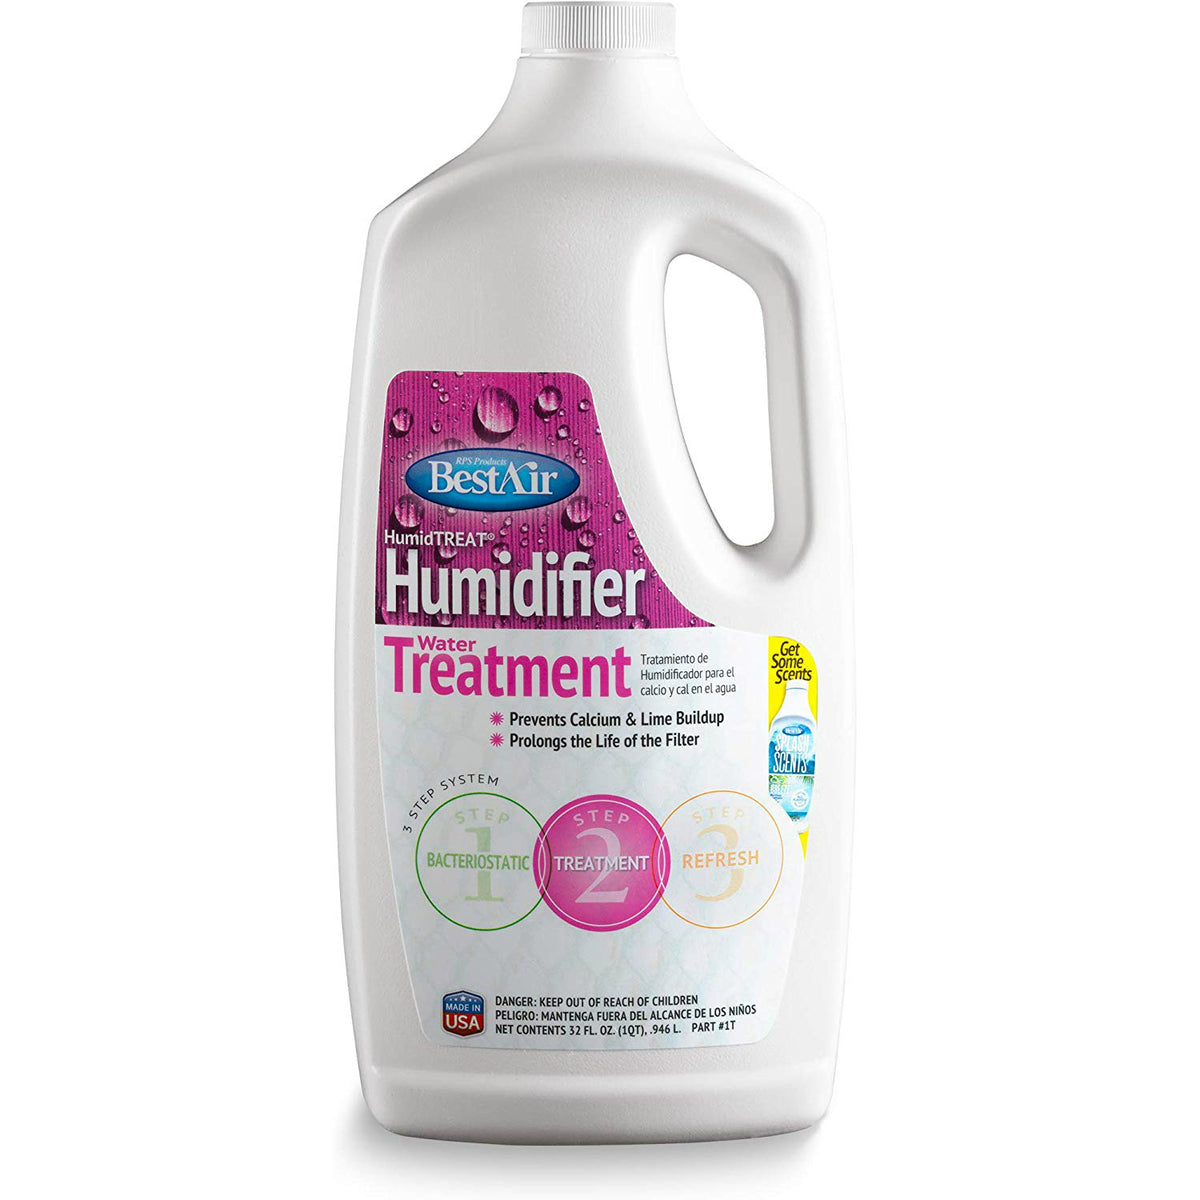 BestAir 1T Humiditreat Water & Scale Treatment for Humidifiers, 32 Oz